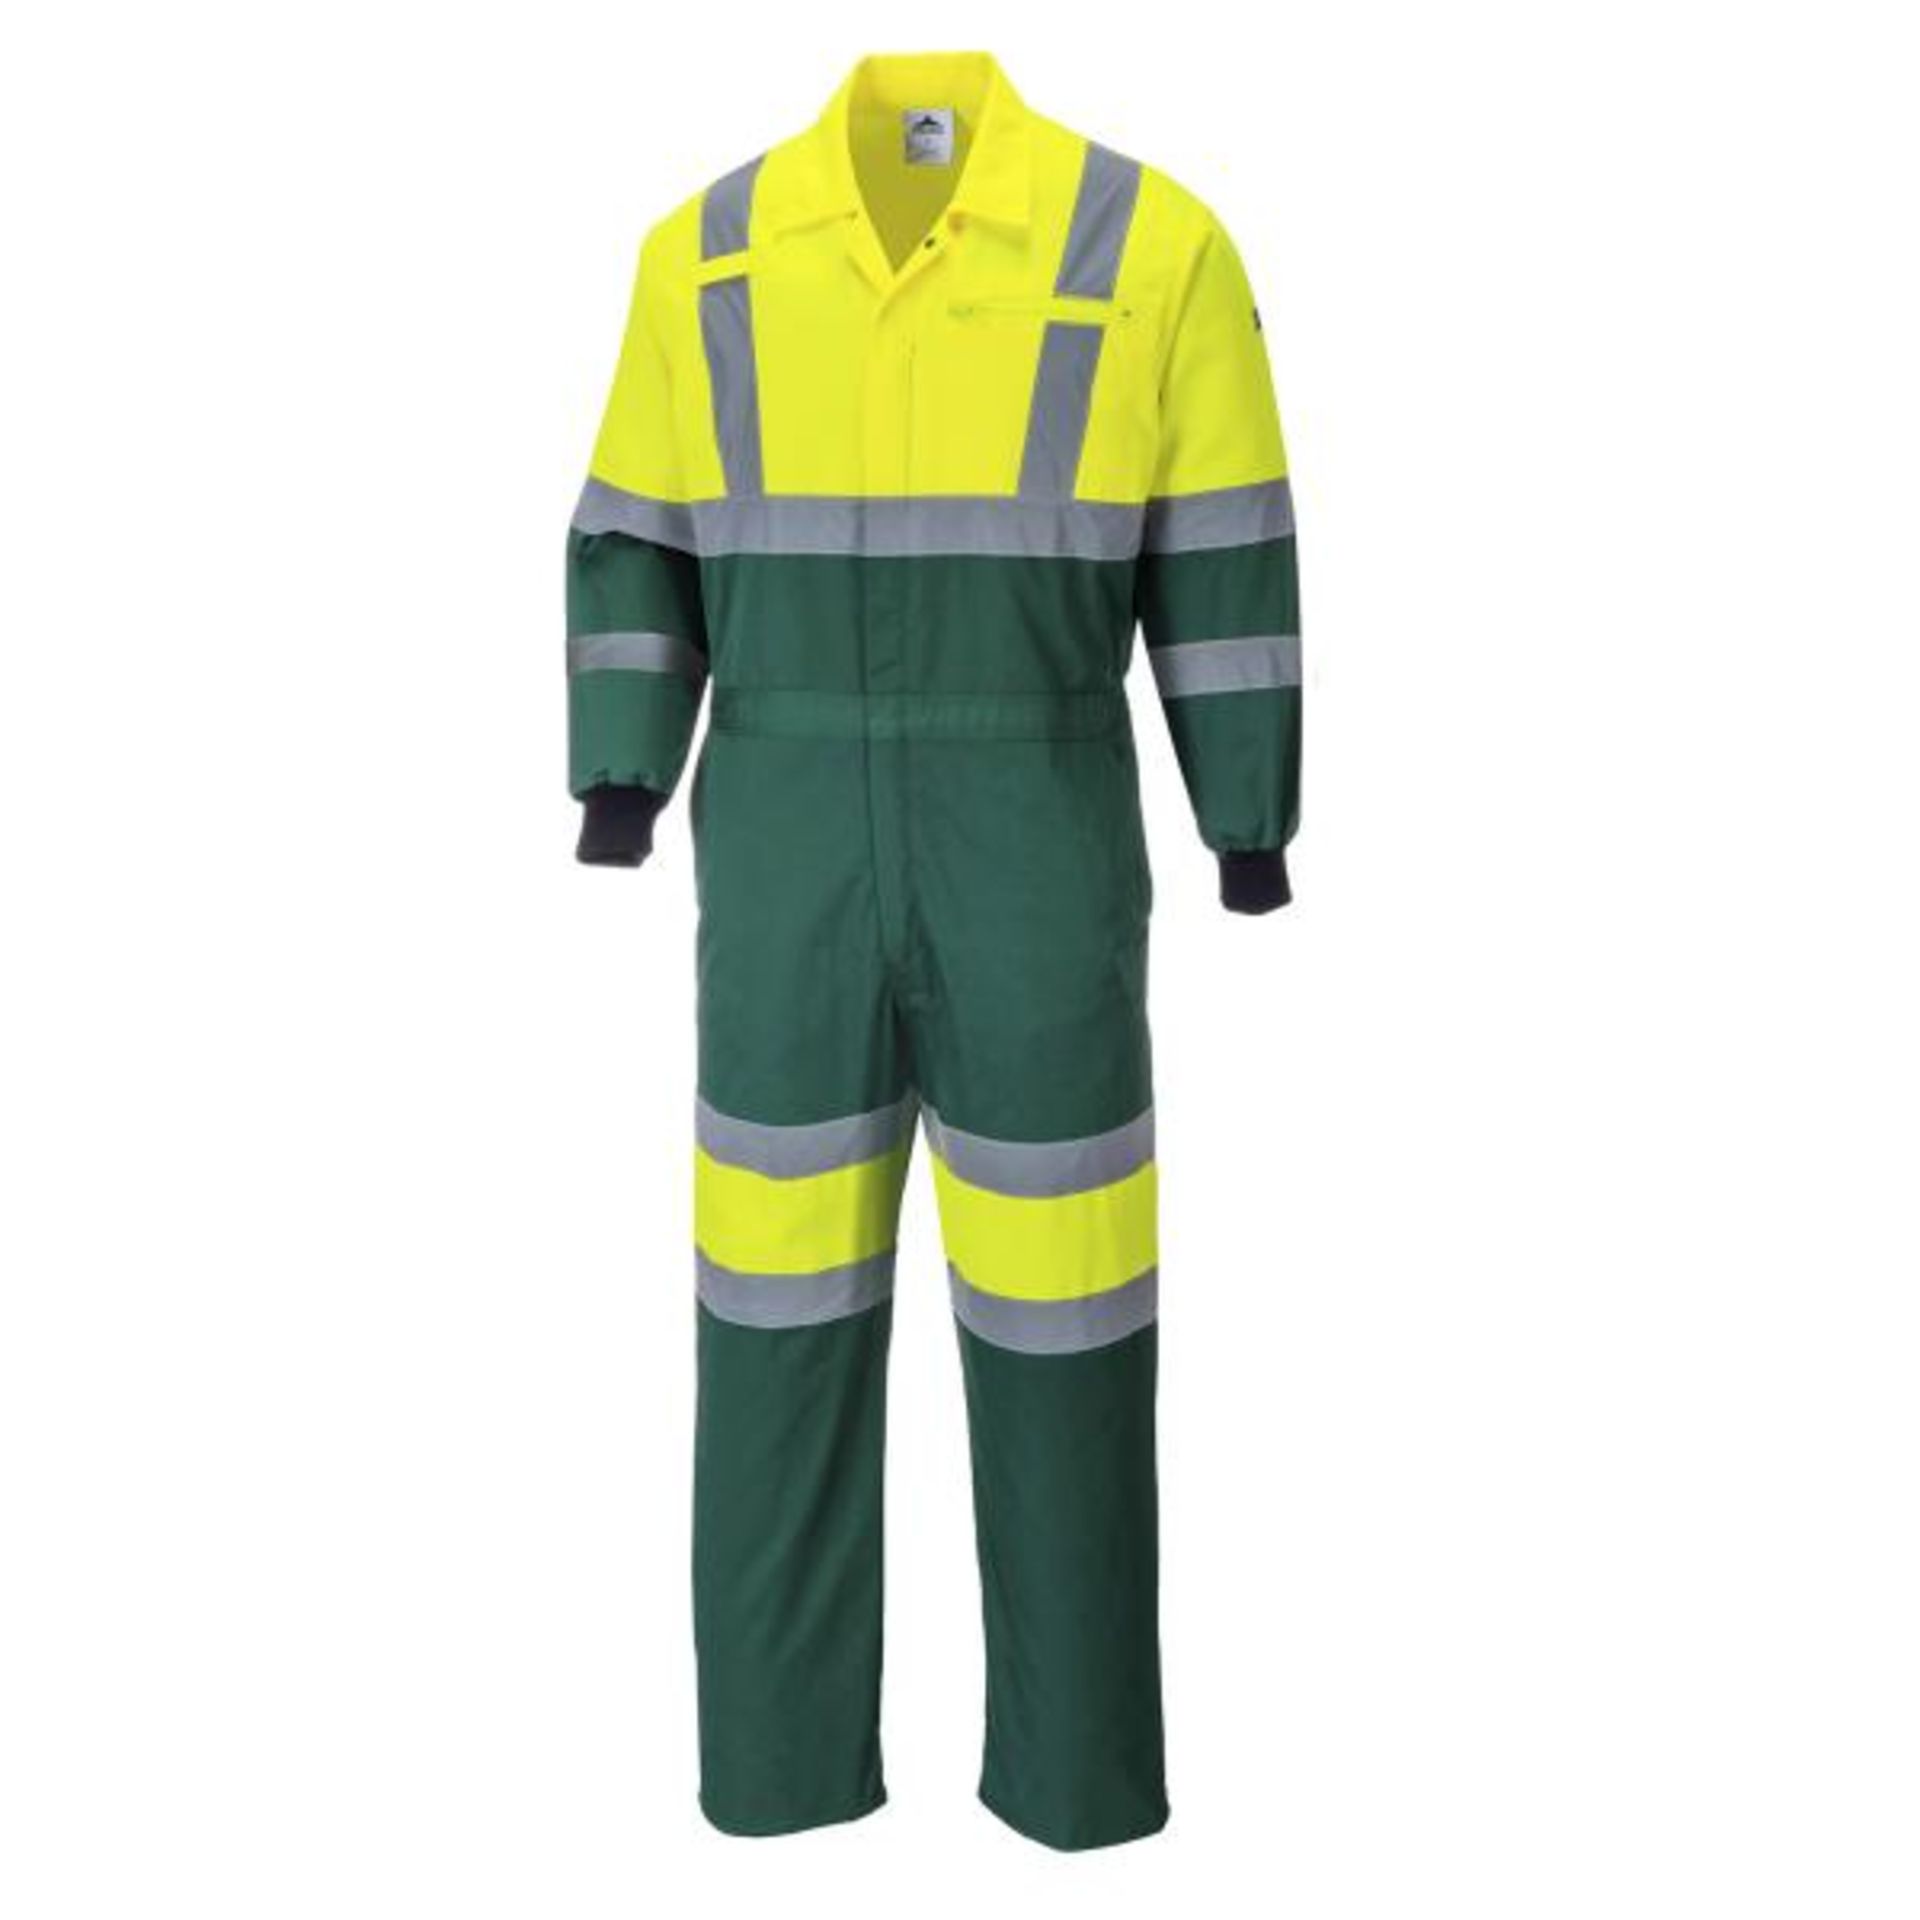 18 x PORTWEST E052YGRL - E052YGR - X HIGH VISIBILITY YELLOW/GREEN COVERALL. Large. RRP £65.32